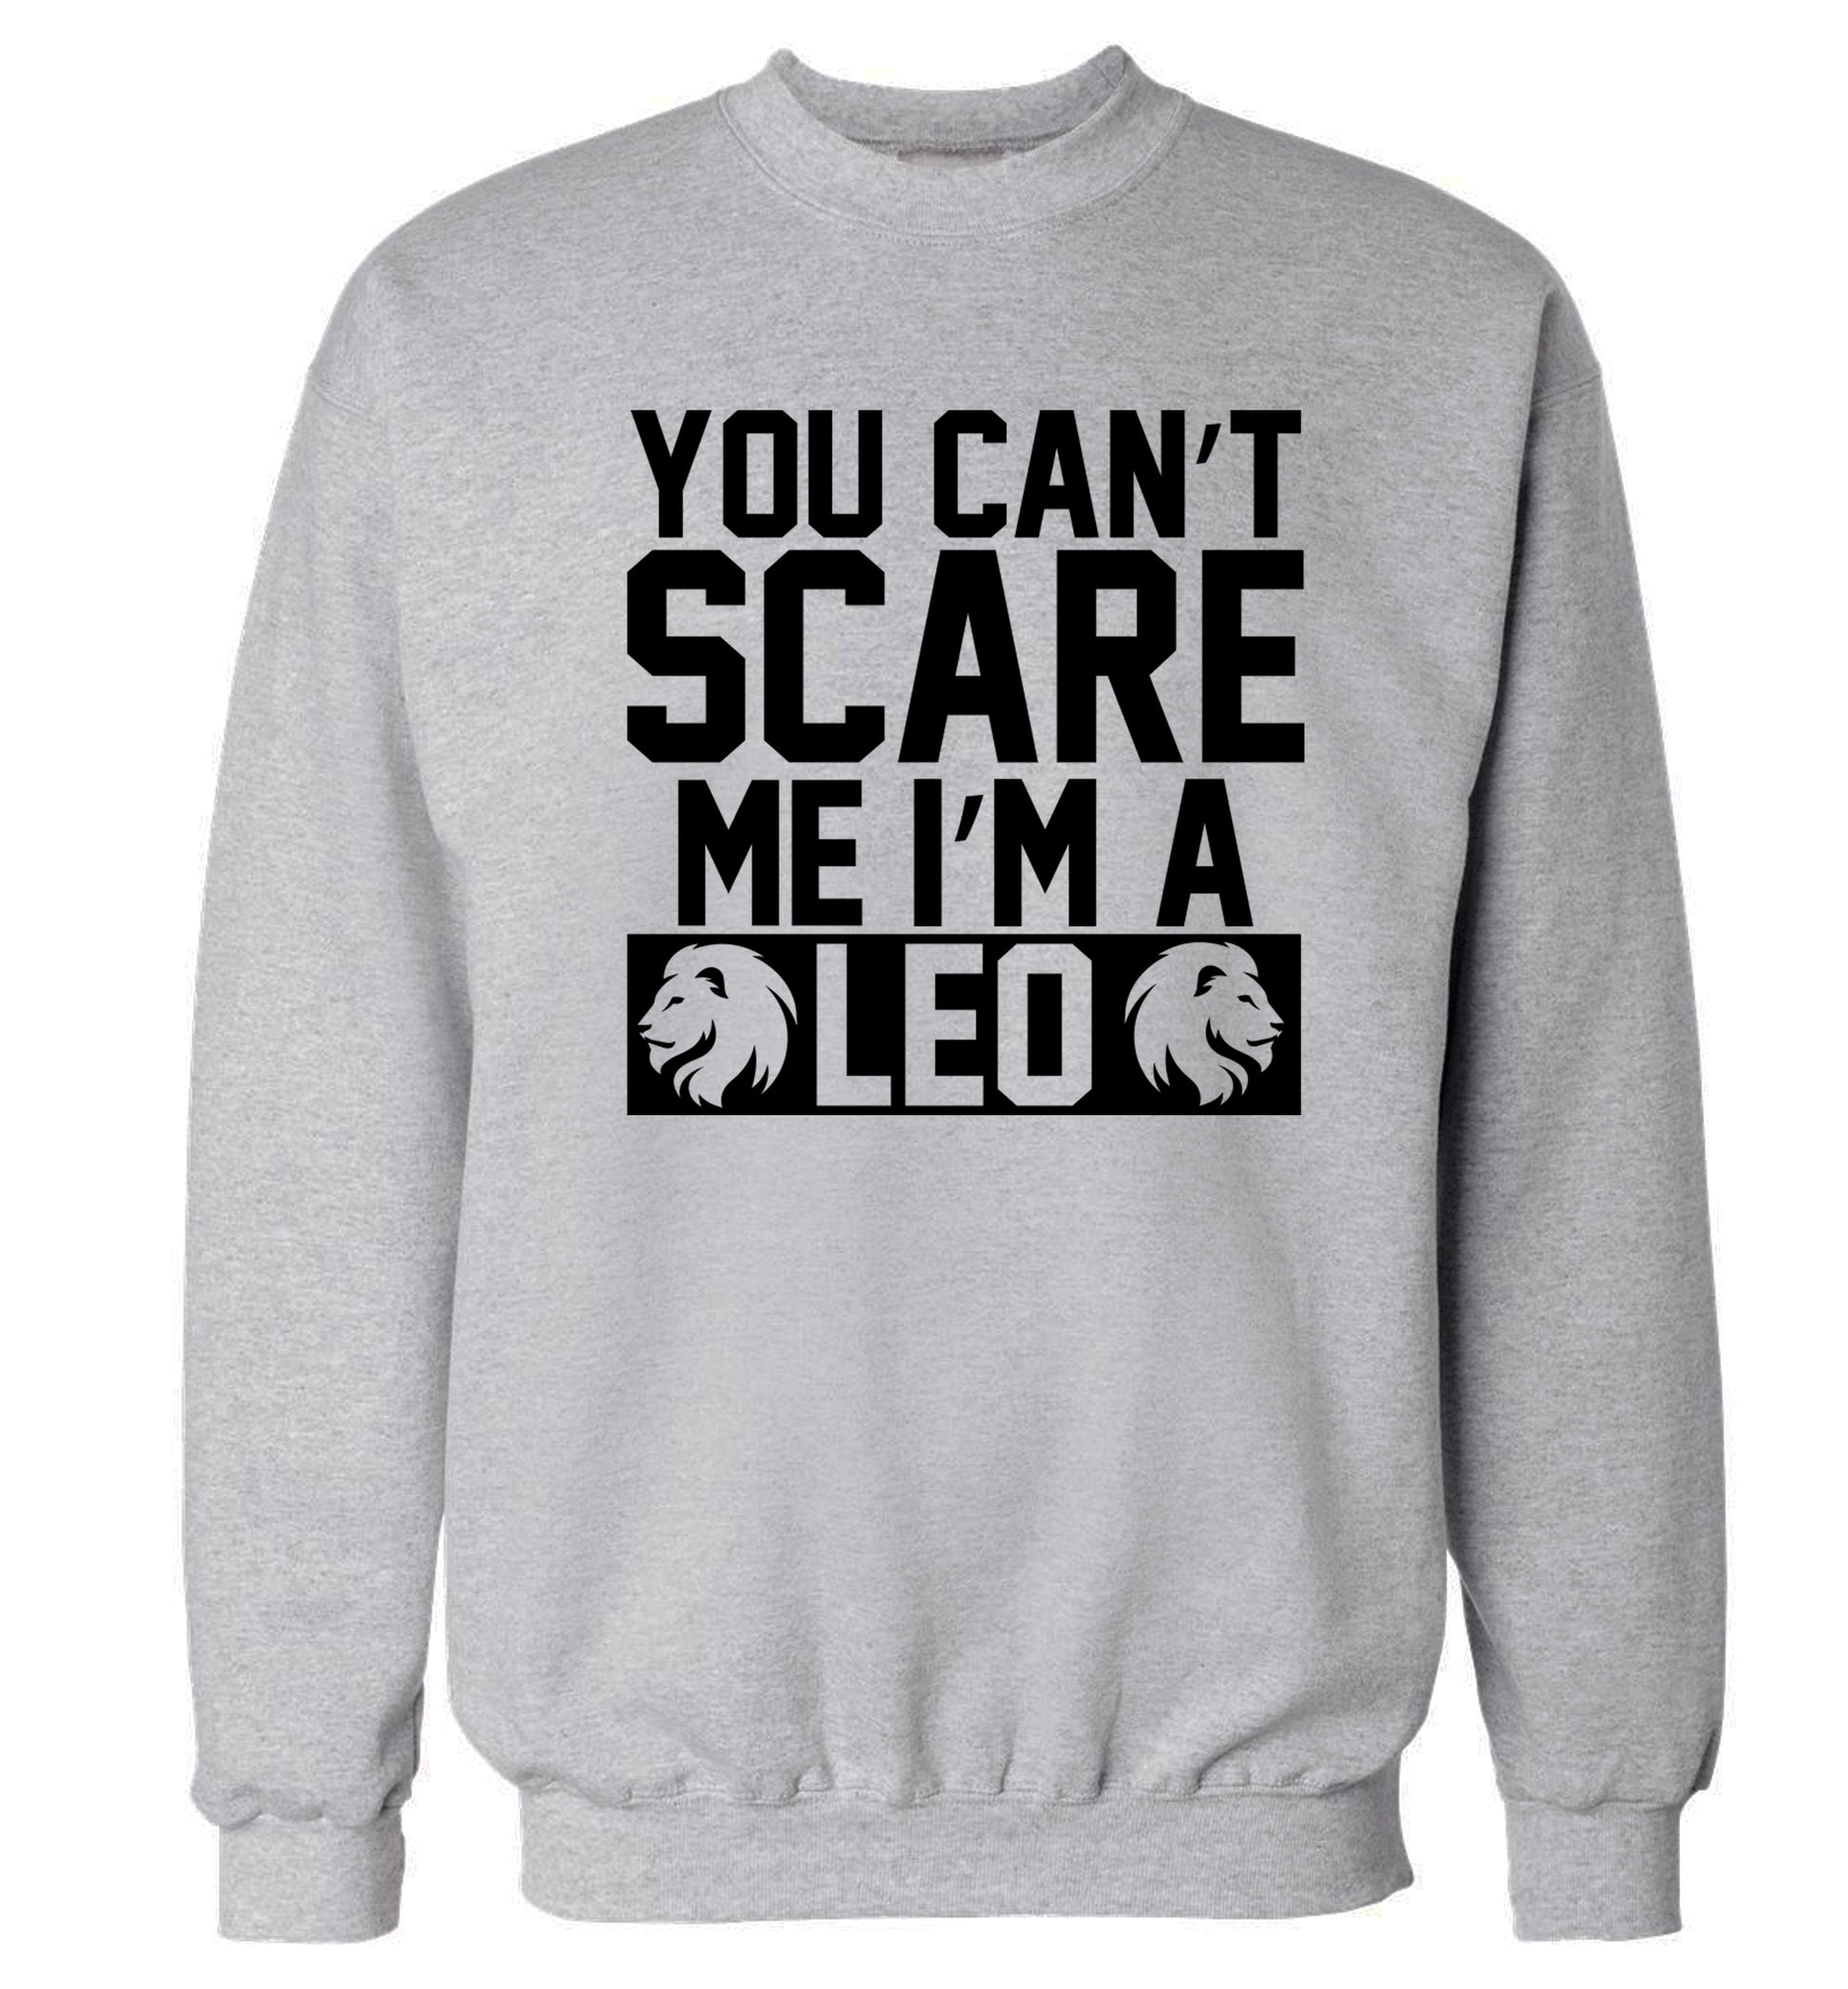 You can't scare me I'm a leo Adult's unisex grey Sweater 2XL